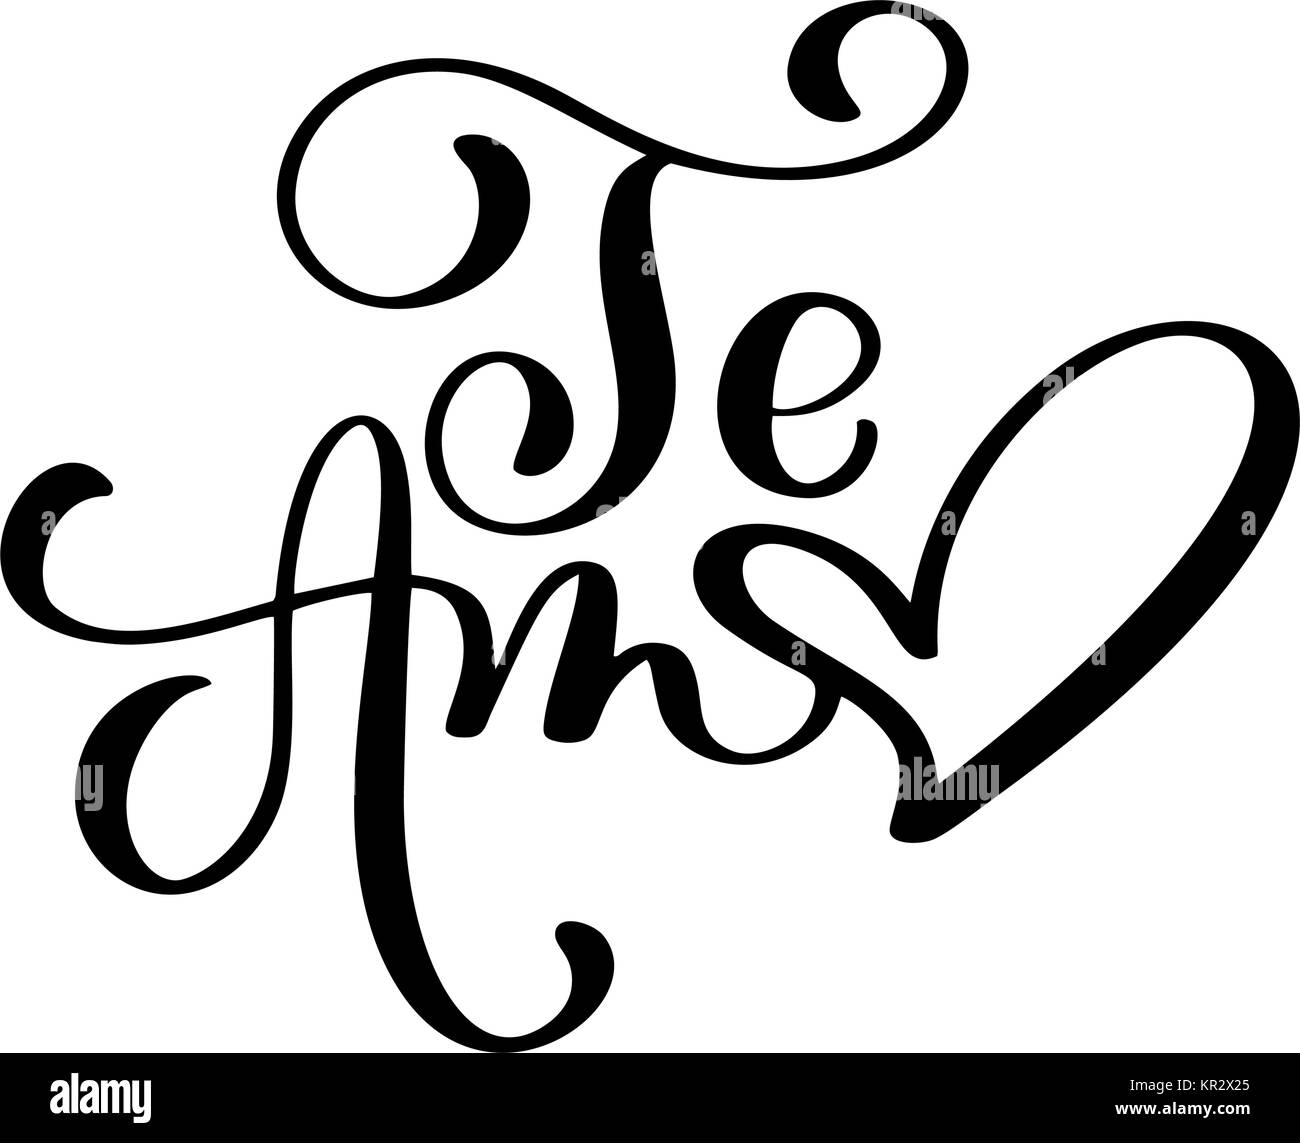 Download Te Amo love you Spanish text calligraphy vector lettering ...